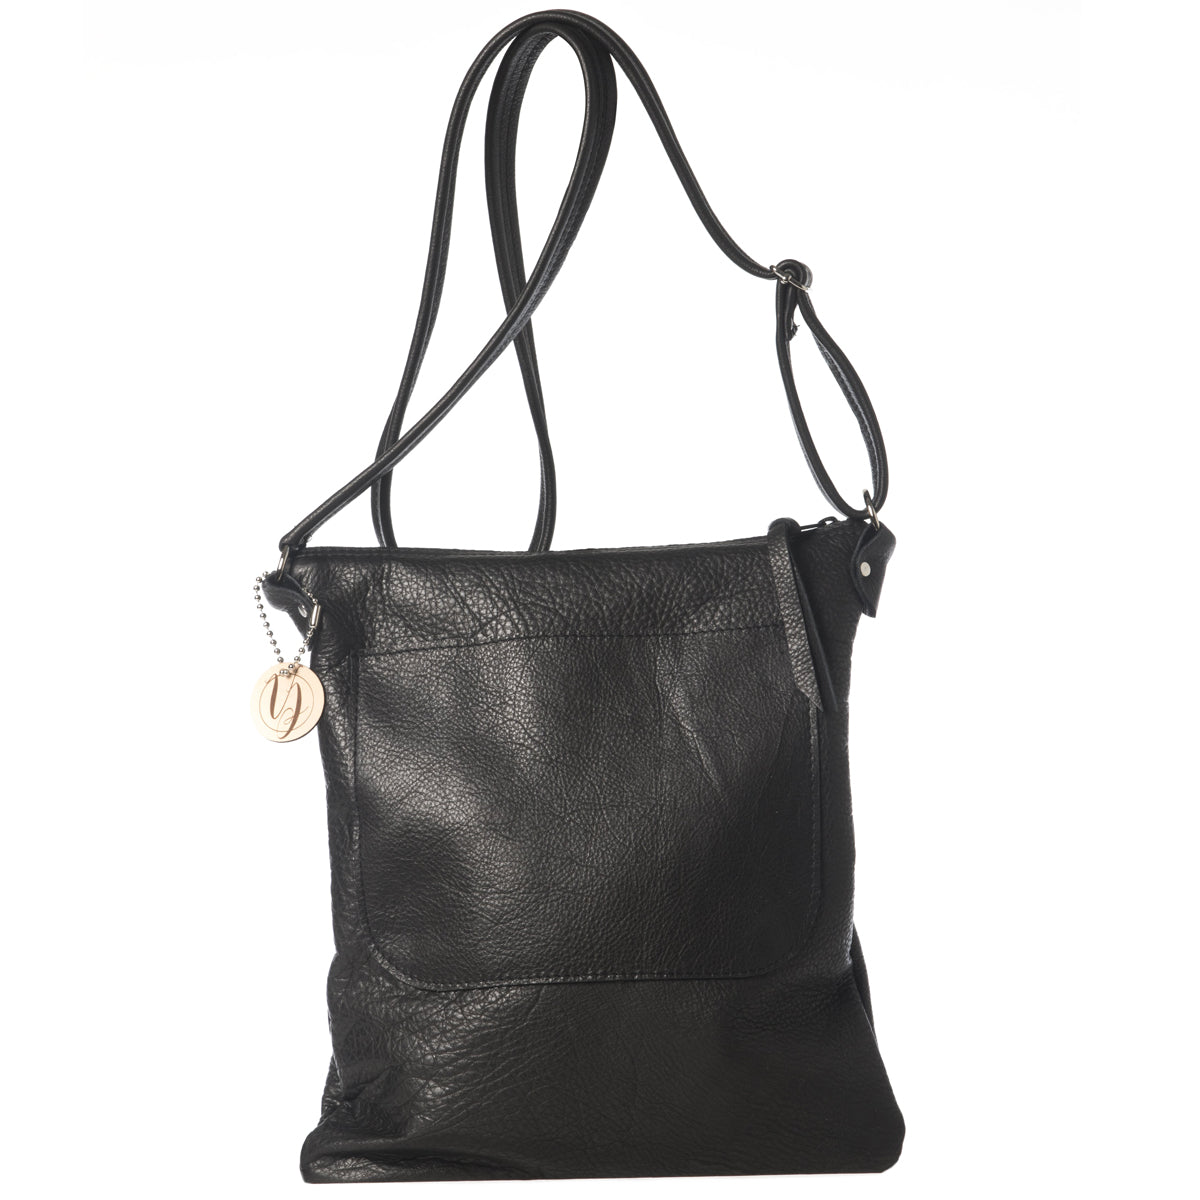 Black leather cross-body bag handmade in the USA by Vicki Jean. 